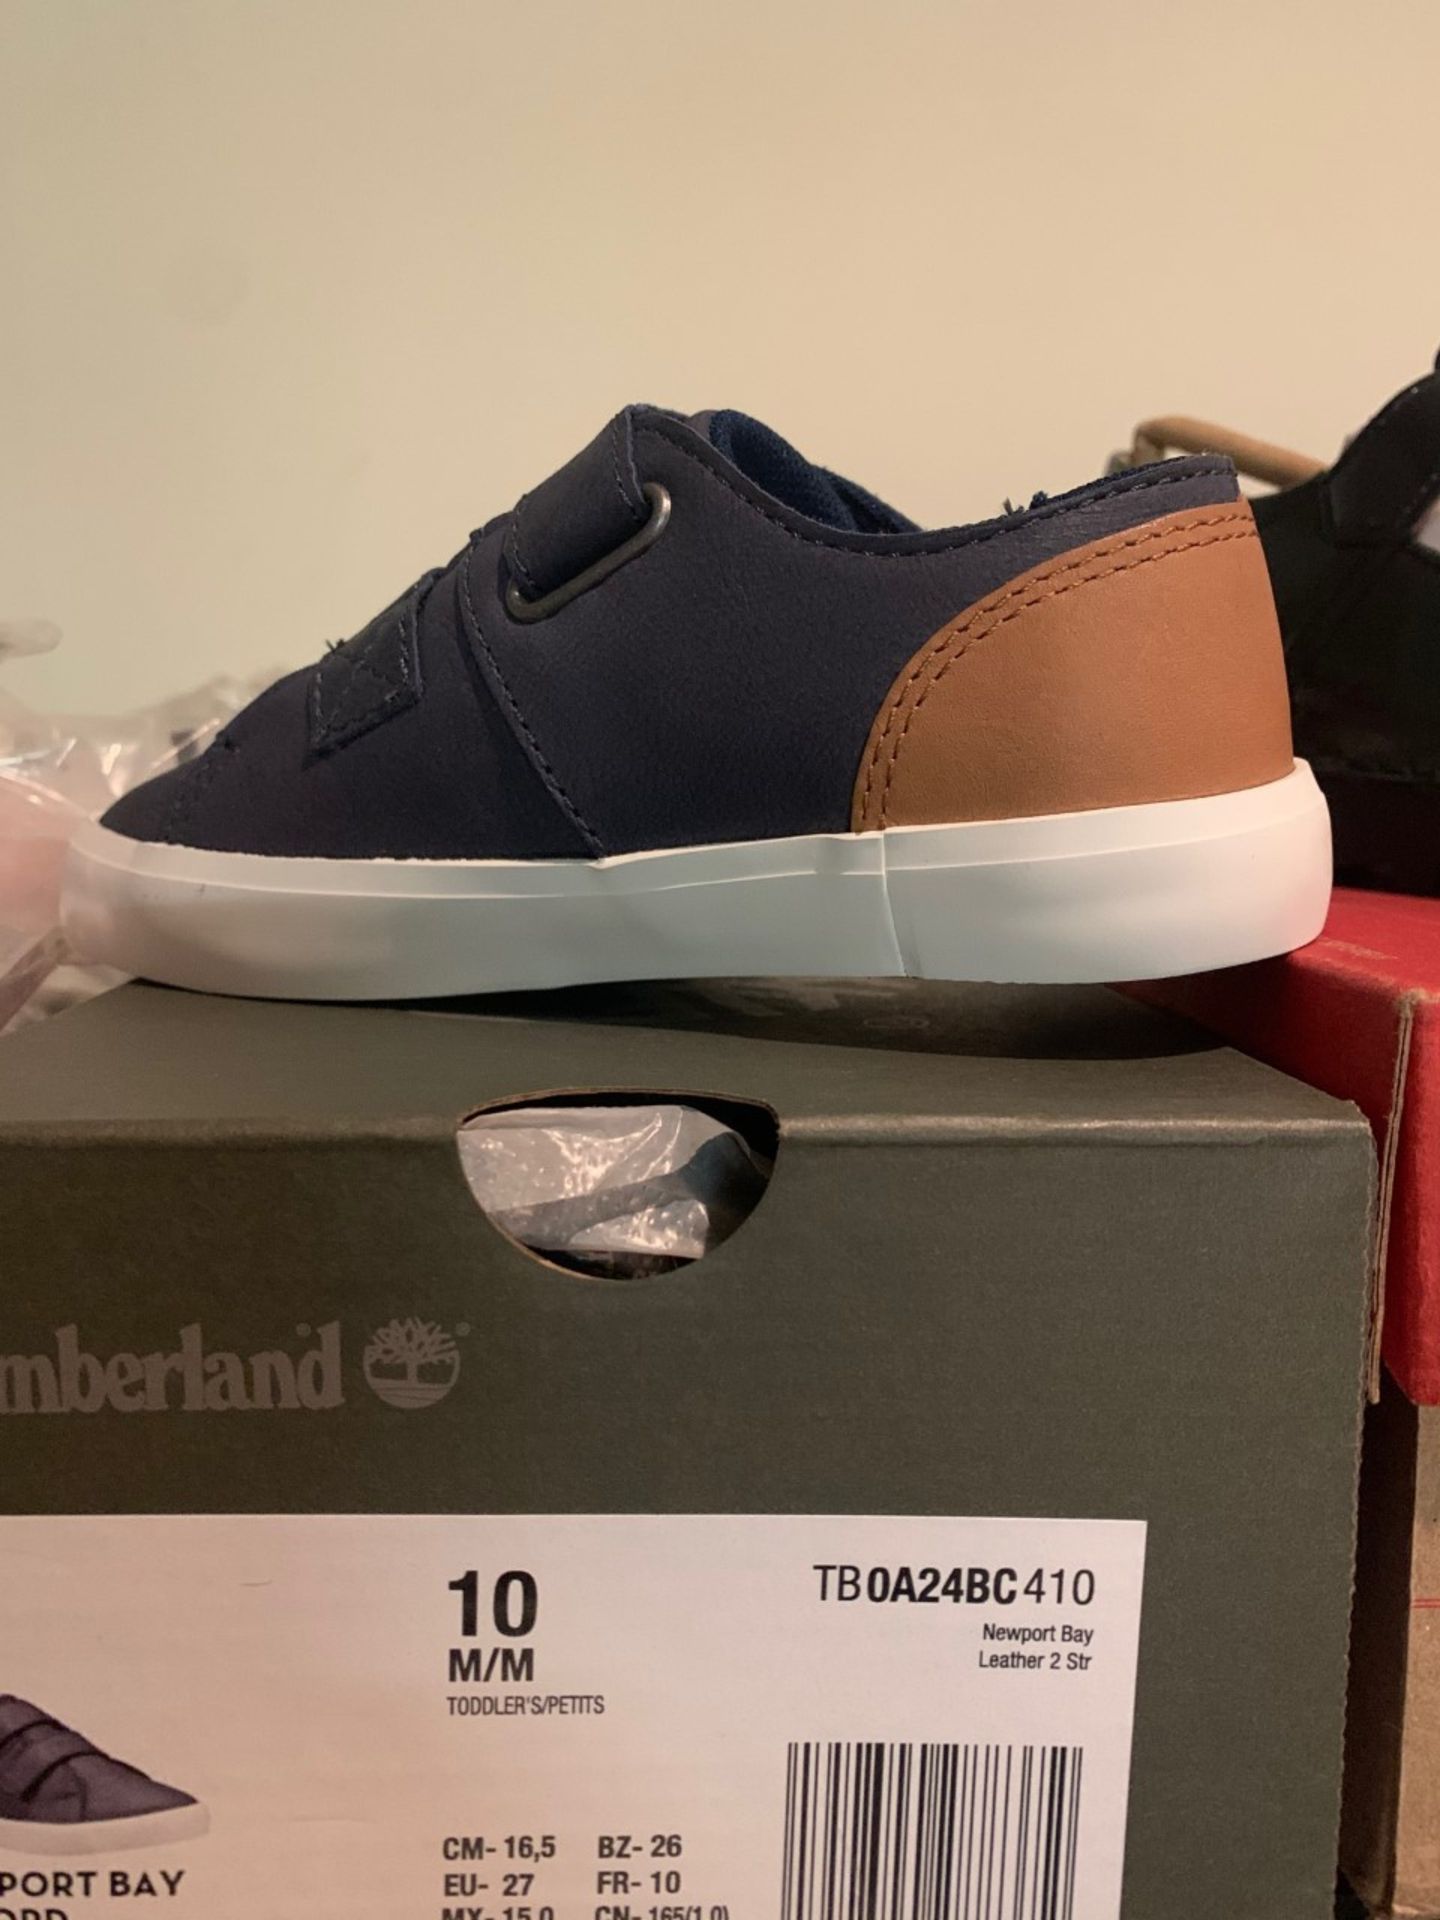 NEW & BOXED TIMBERLAND NEWPORT BAY NAVY SIZE INFANT 9.5 (149/21)